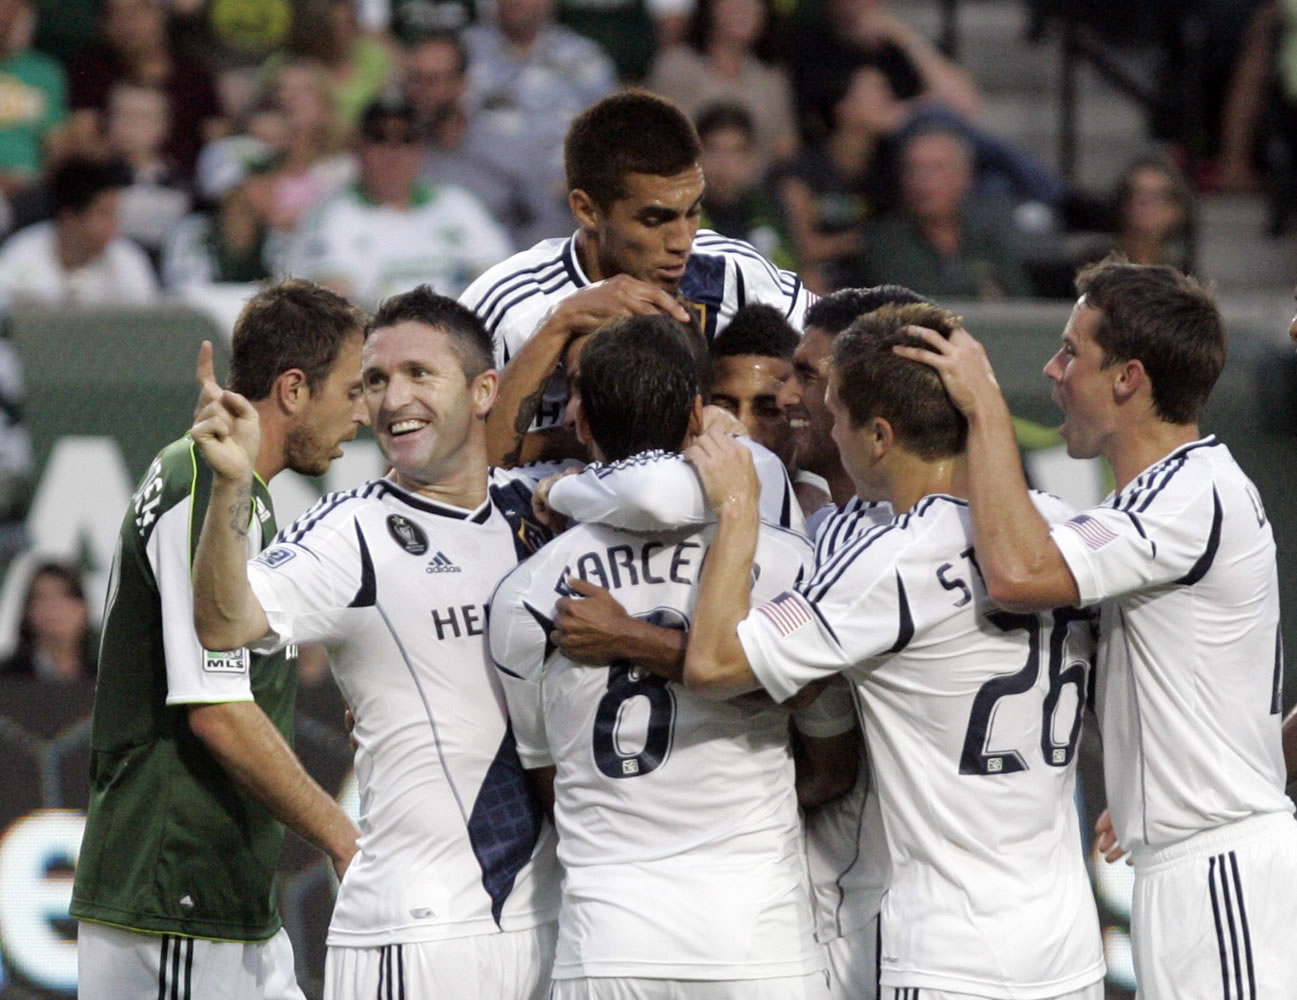 Teammates mob Los Angeles Galaxy midfielder David Beckham (not visible in middle of crowd) after he scores his second goal of the first half against the Timbers.